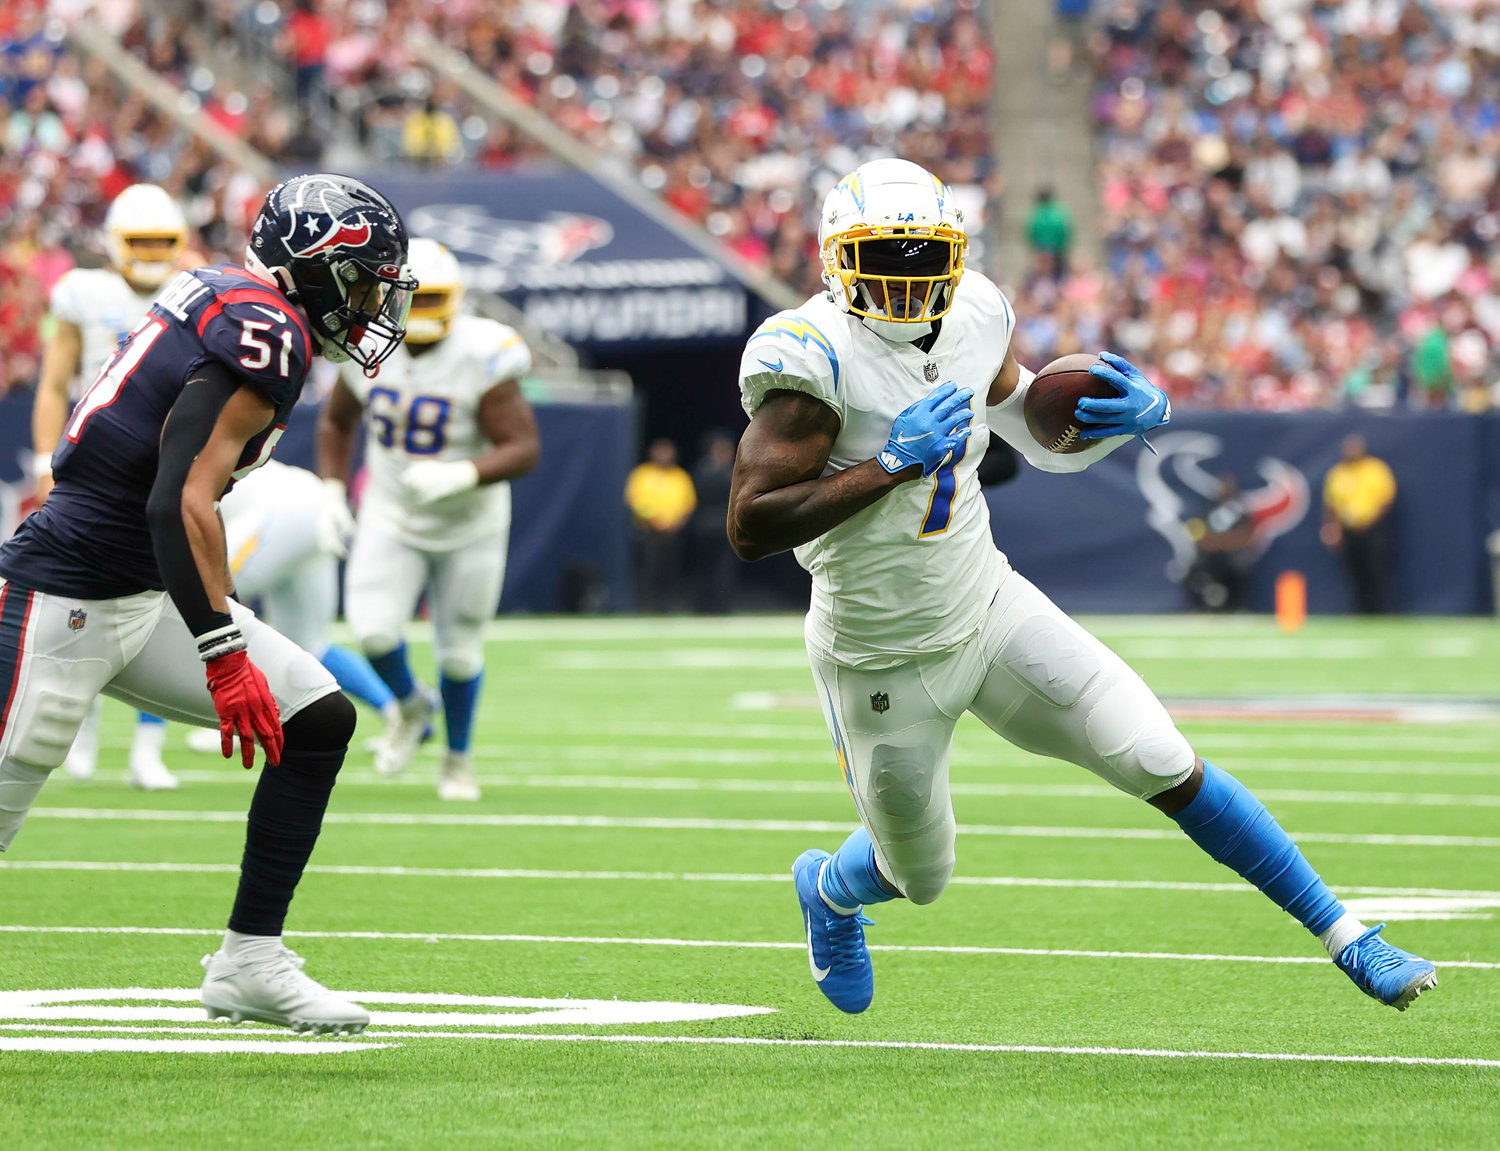 Chargers tight end Gerald Everett (7) carries the ball after a catch during an NFL game between the Texans and the Chargers on Oct. 2, 2022 in Houston. The Chargers won 34-24.